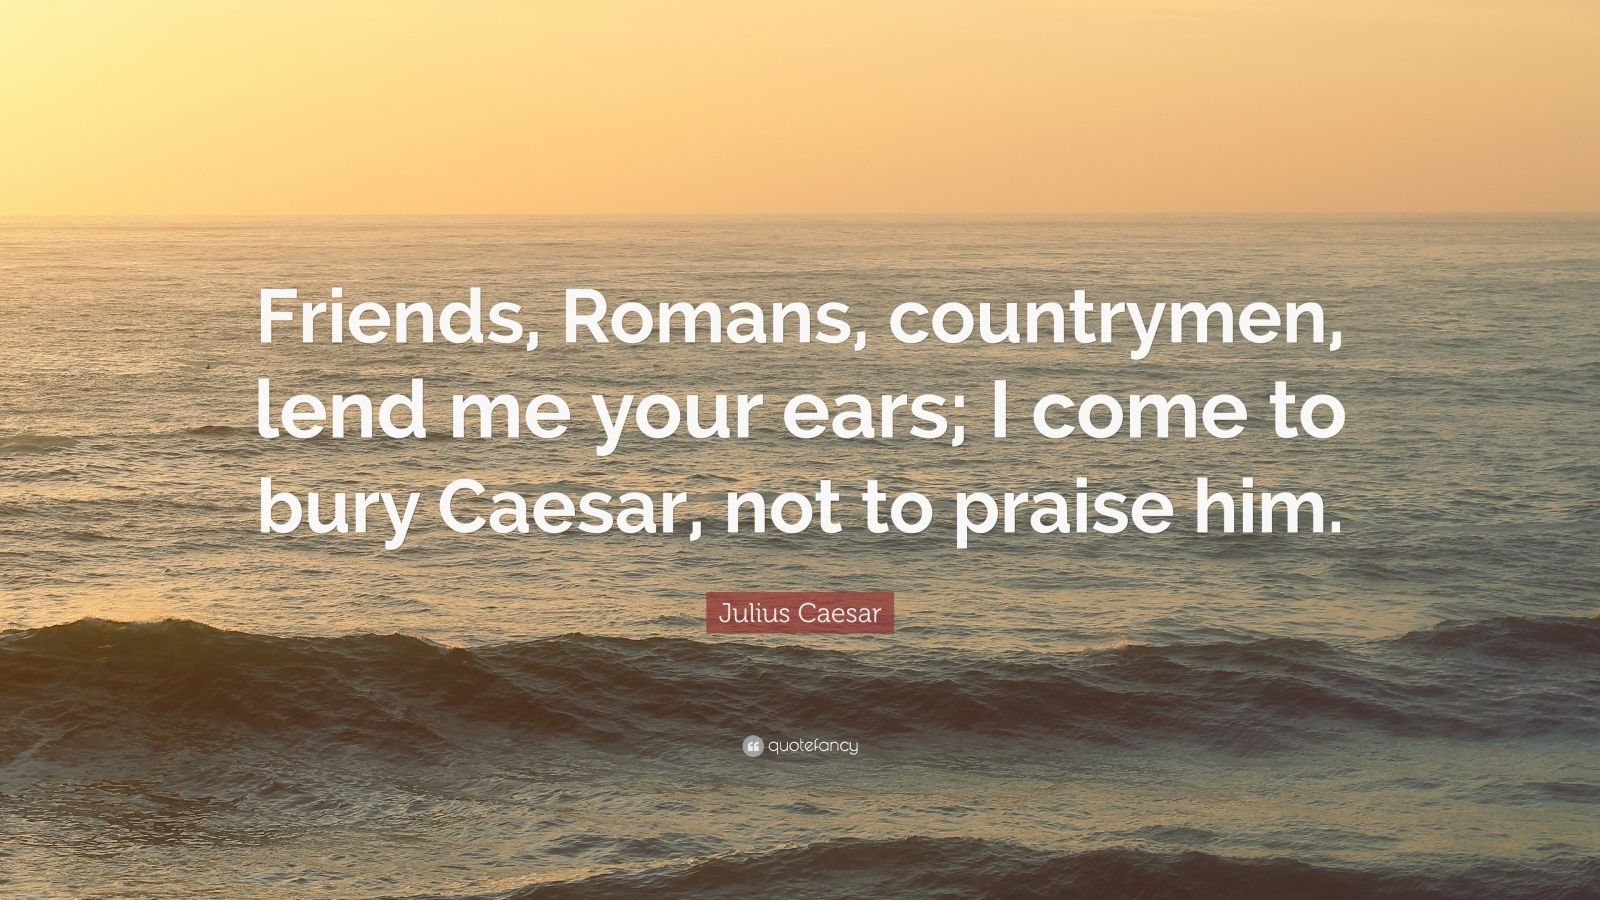 friends romans and countrymen lend me your ears